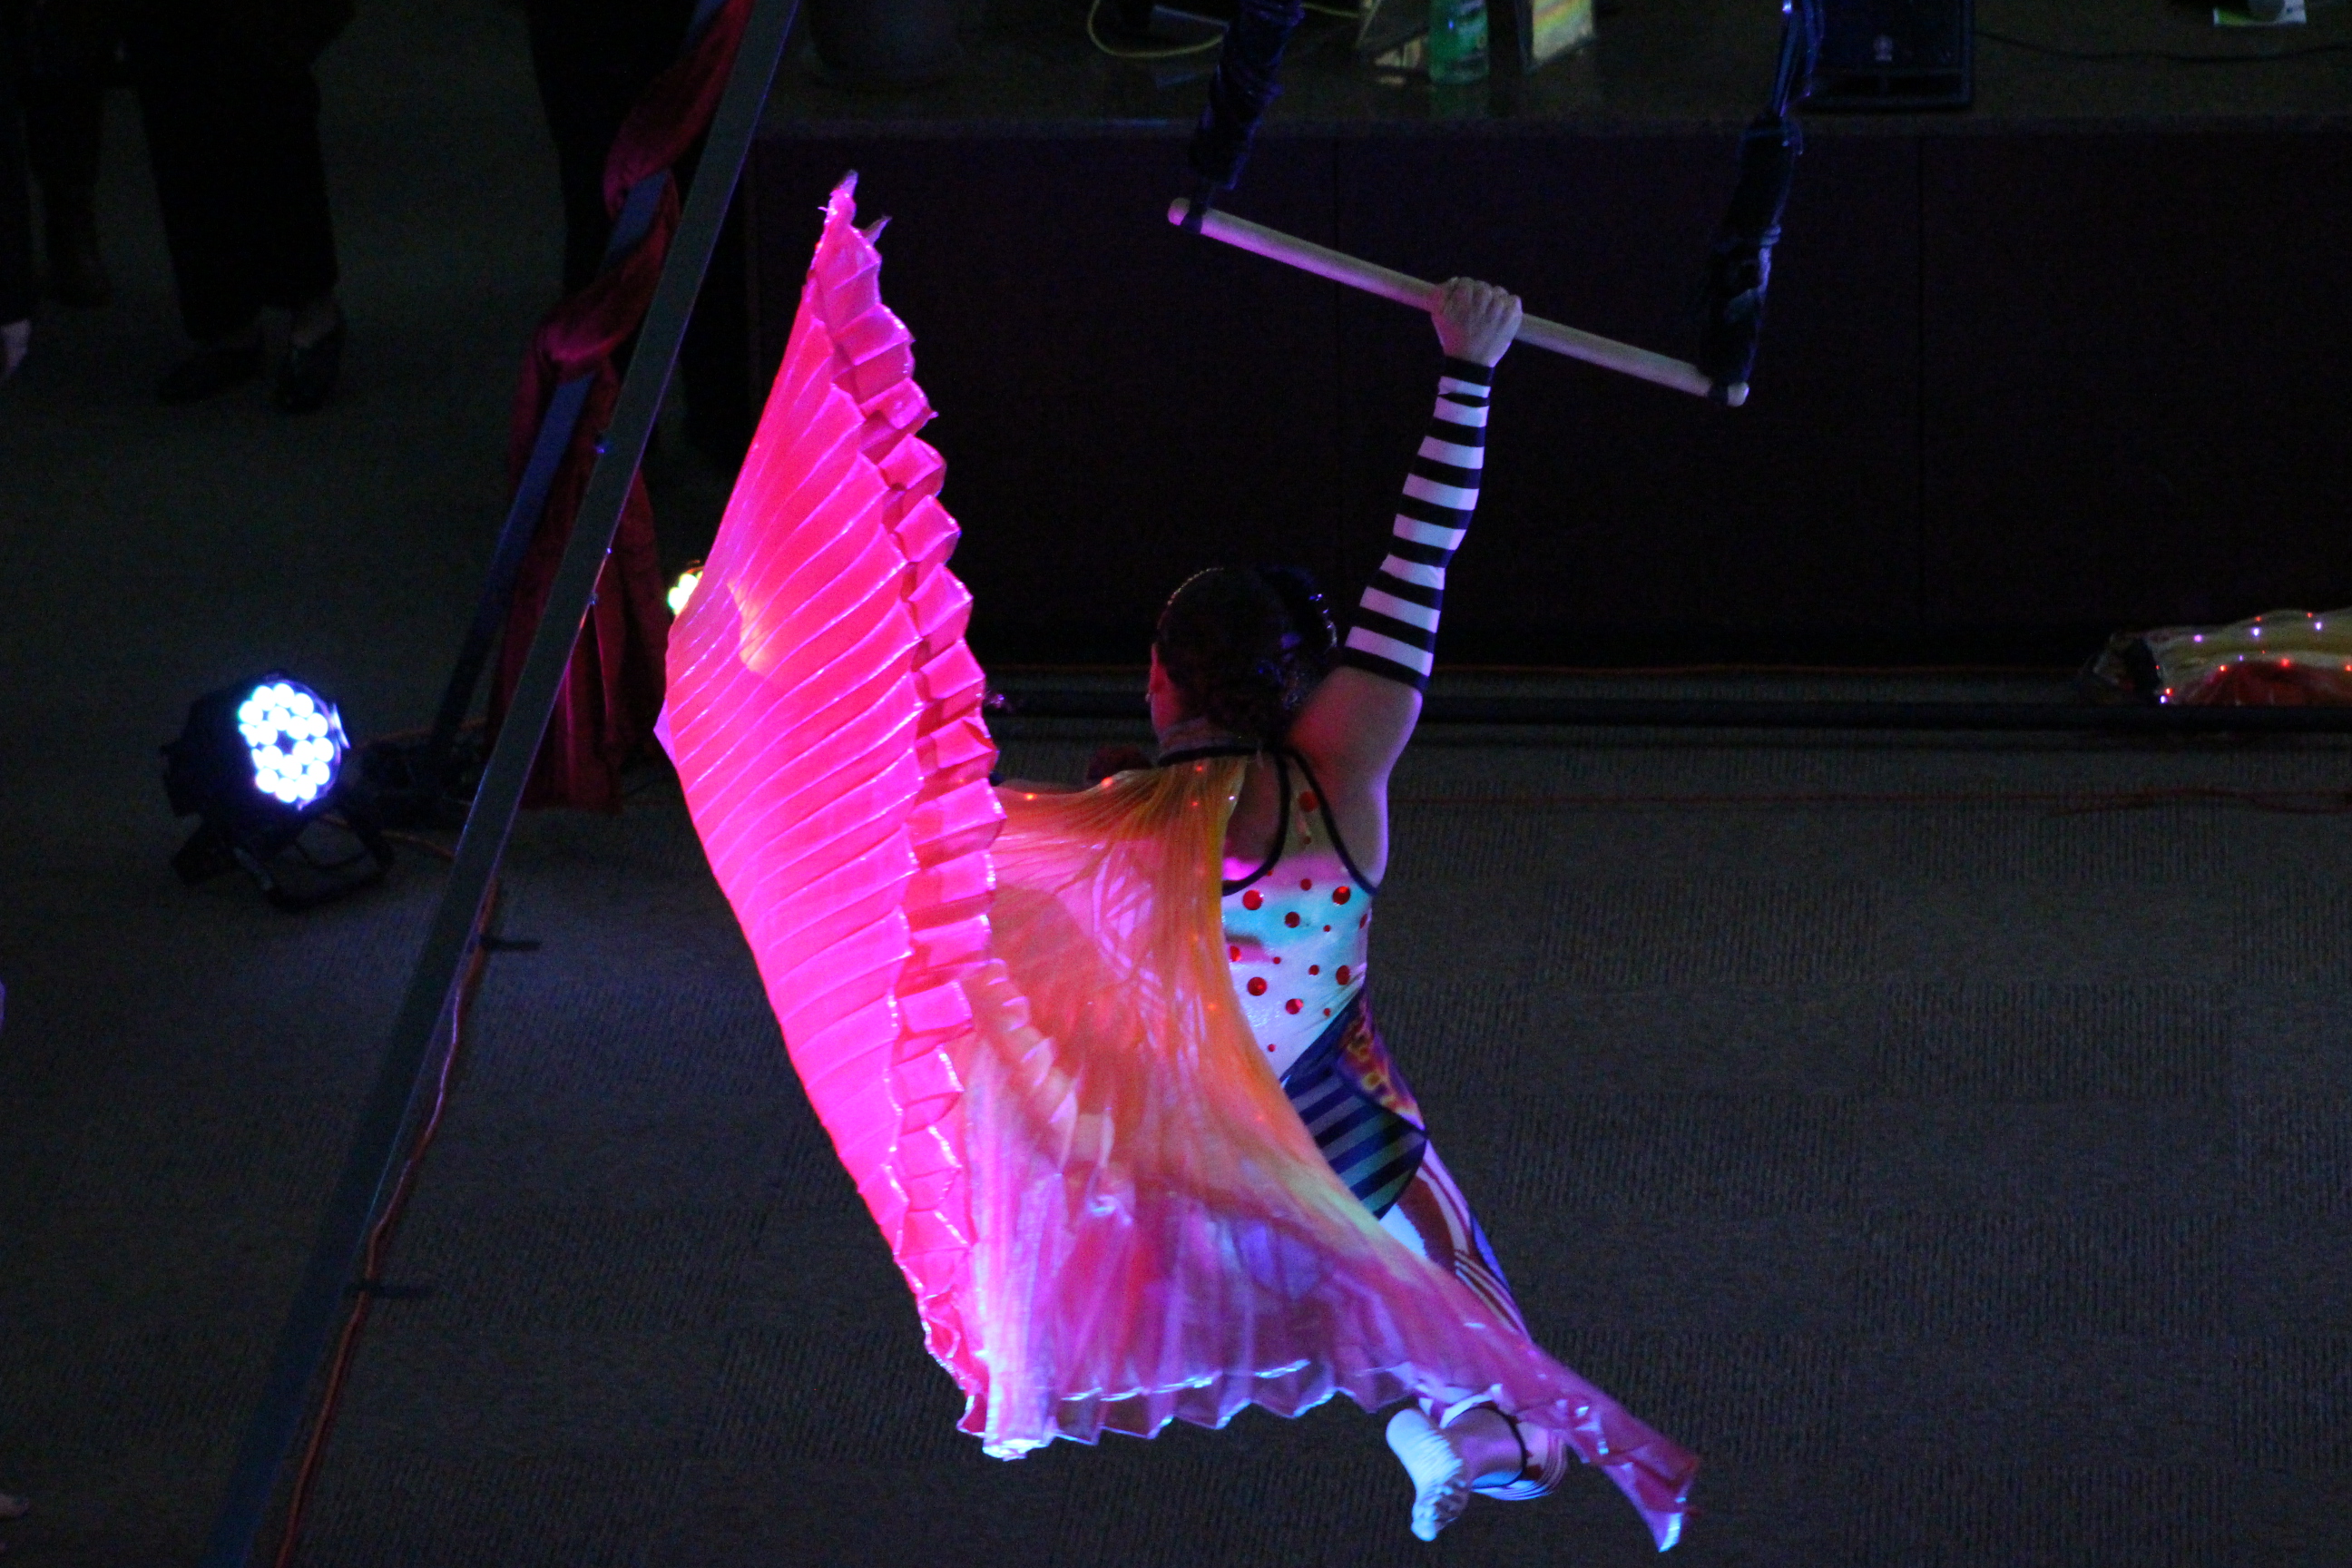 Aerial performer with pink parasol swings from suspended bar